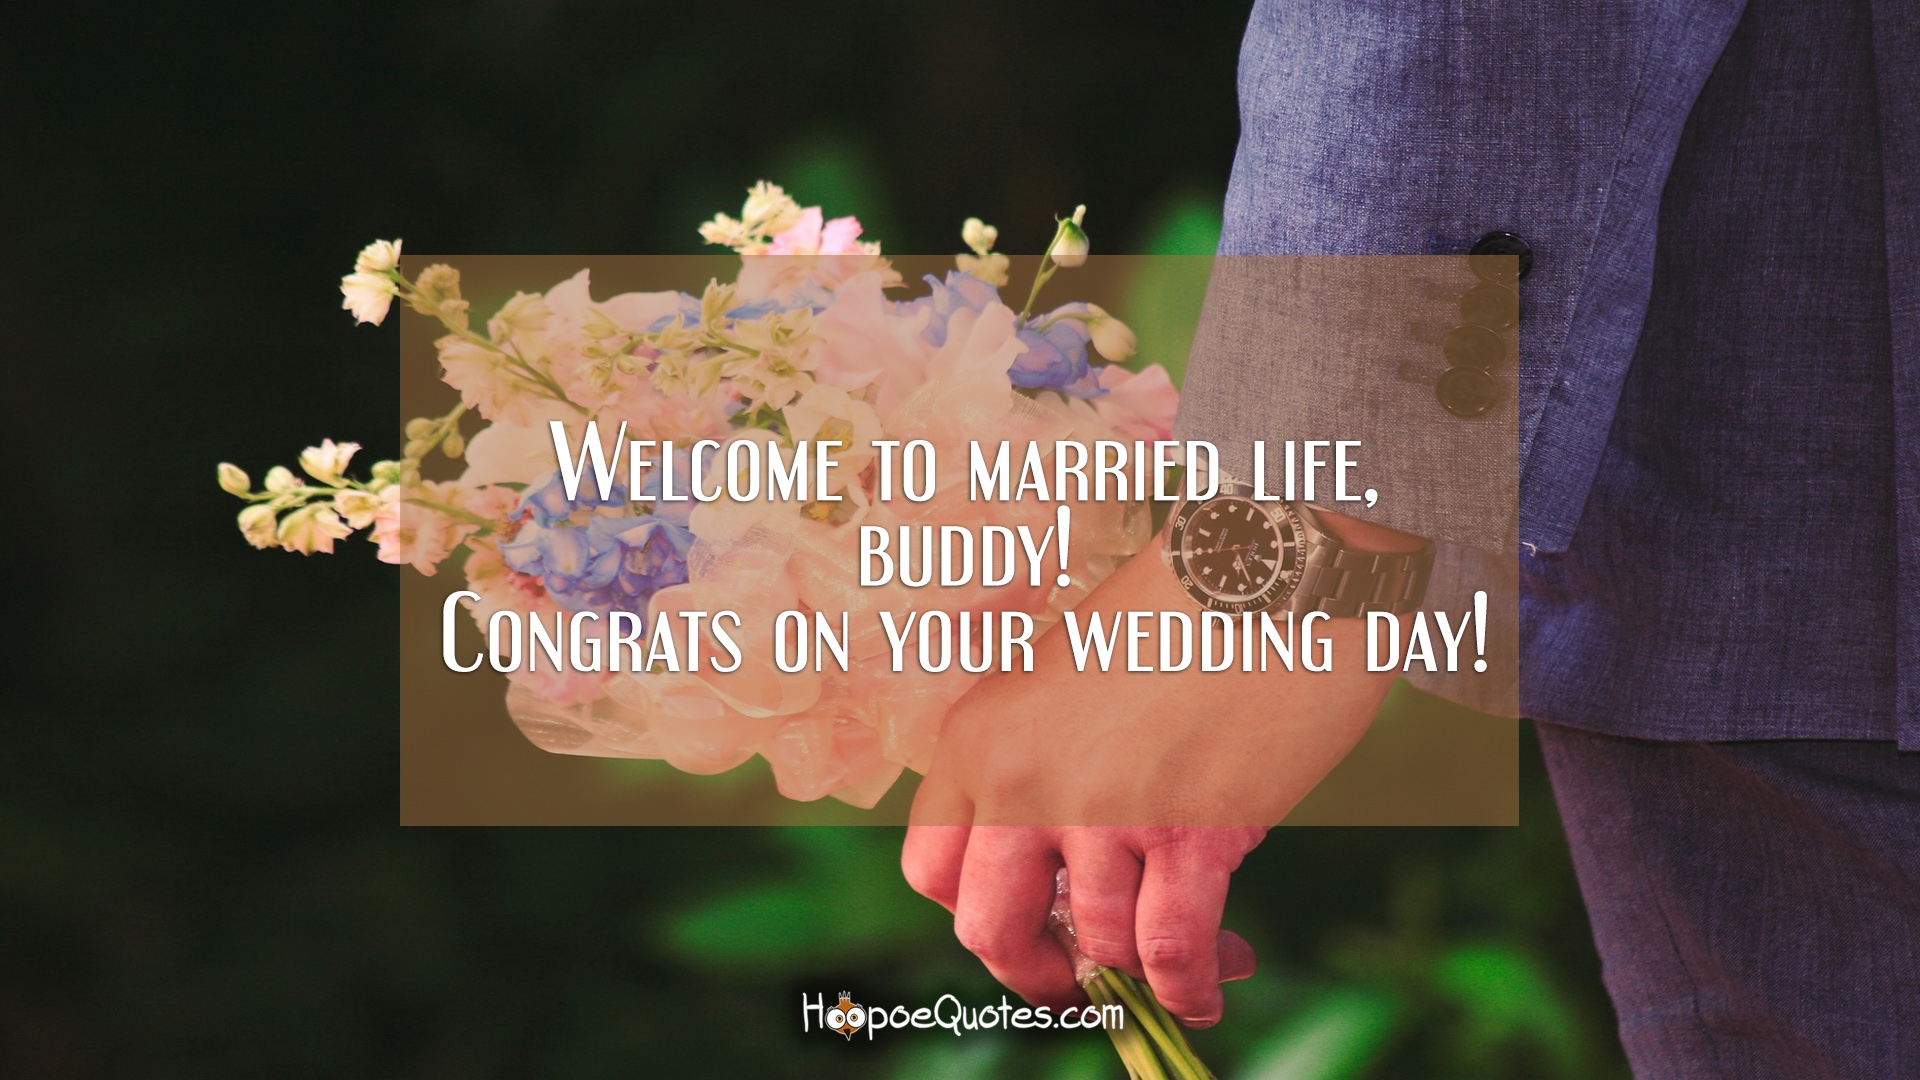 Welcome to married life, buddy! Congrats on your wedding day! - HoopoeQuotes